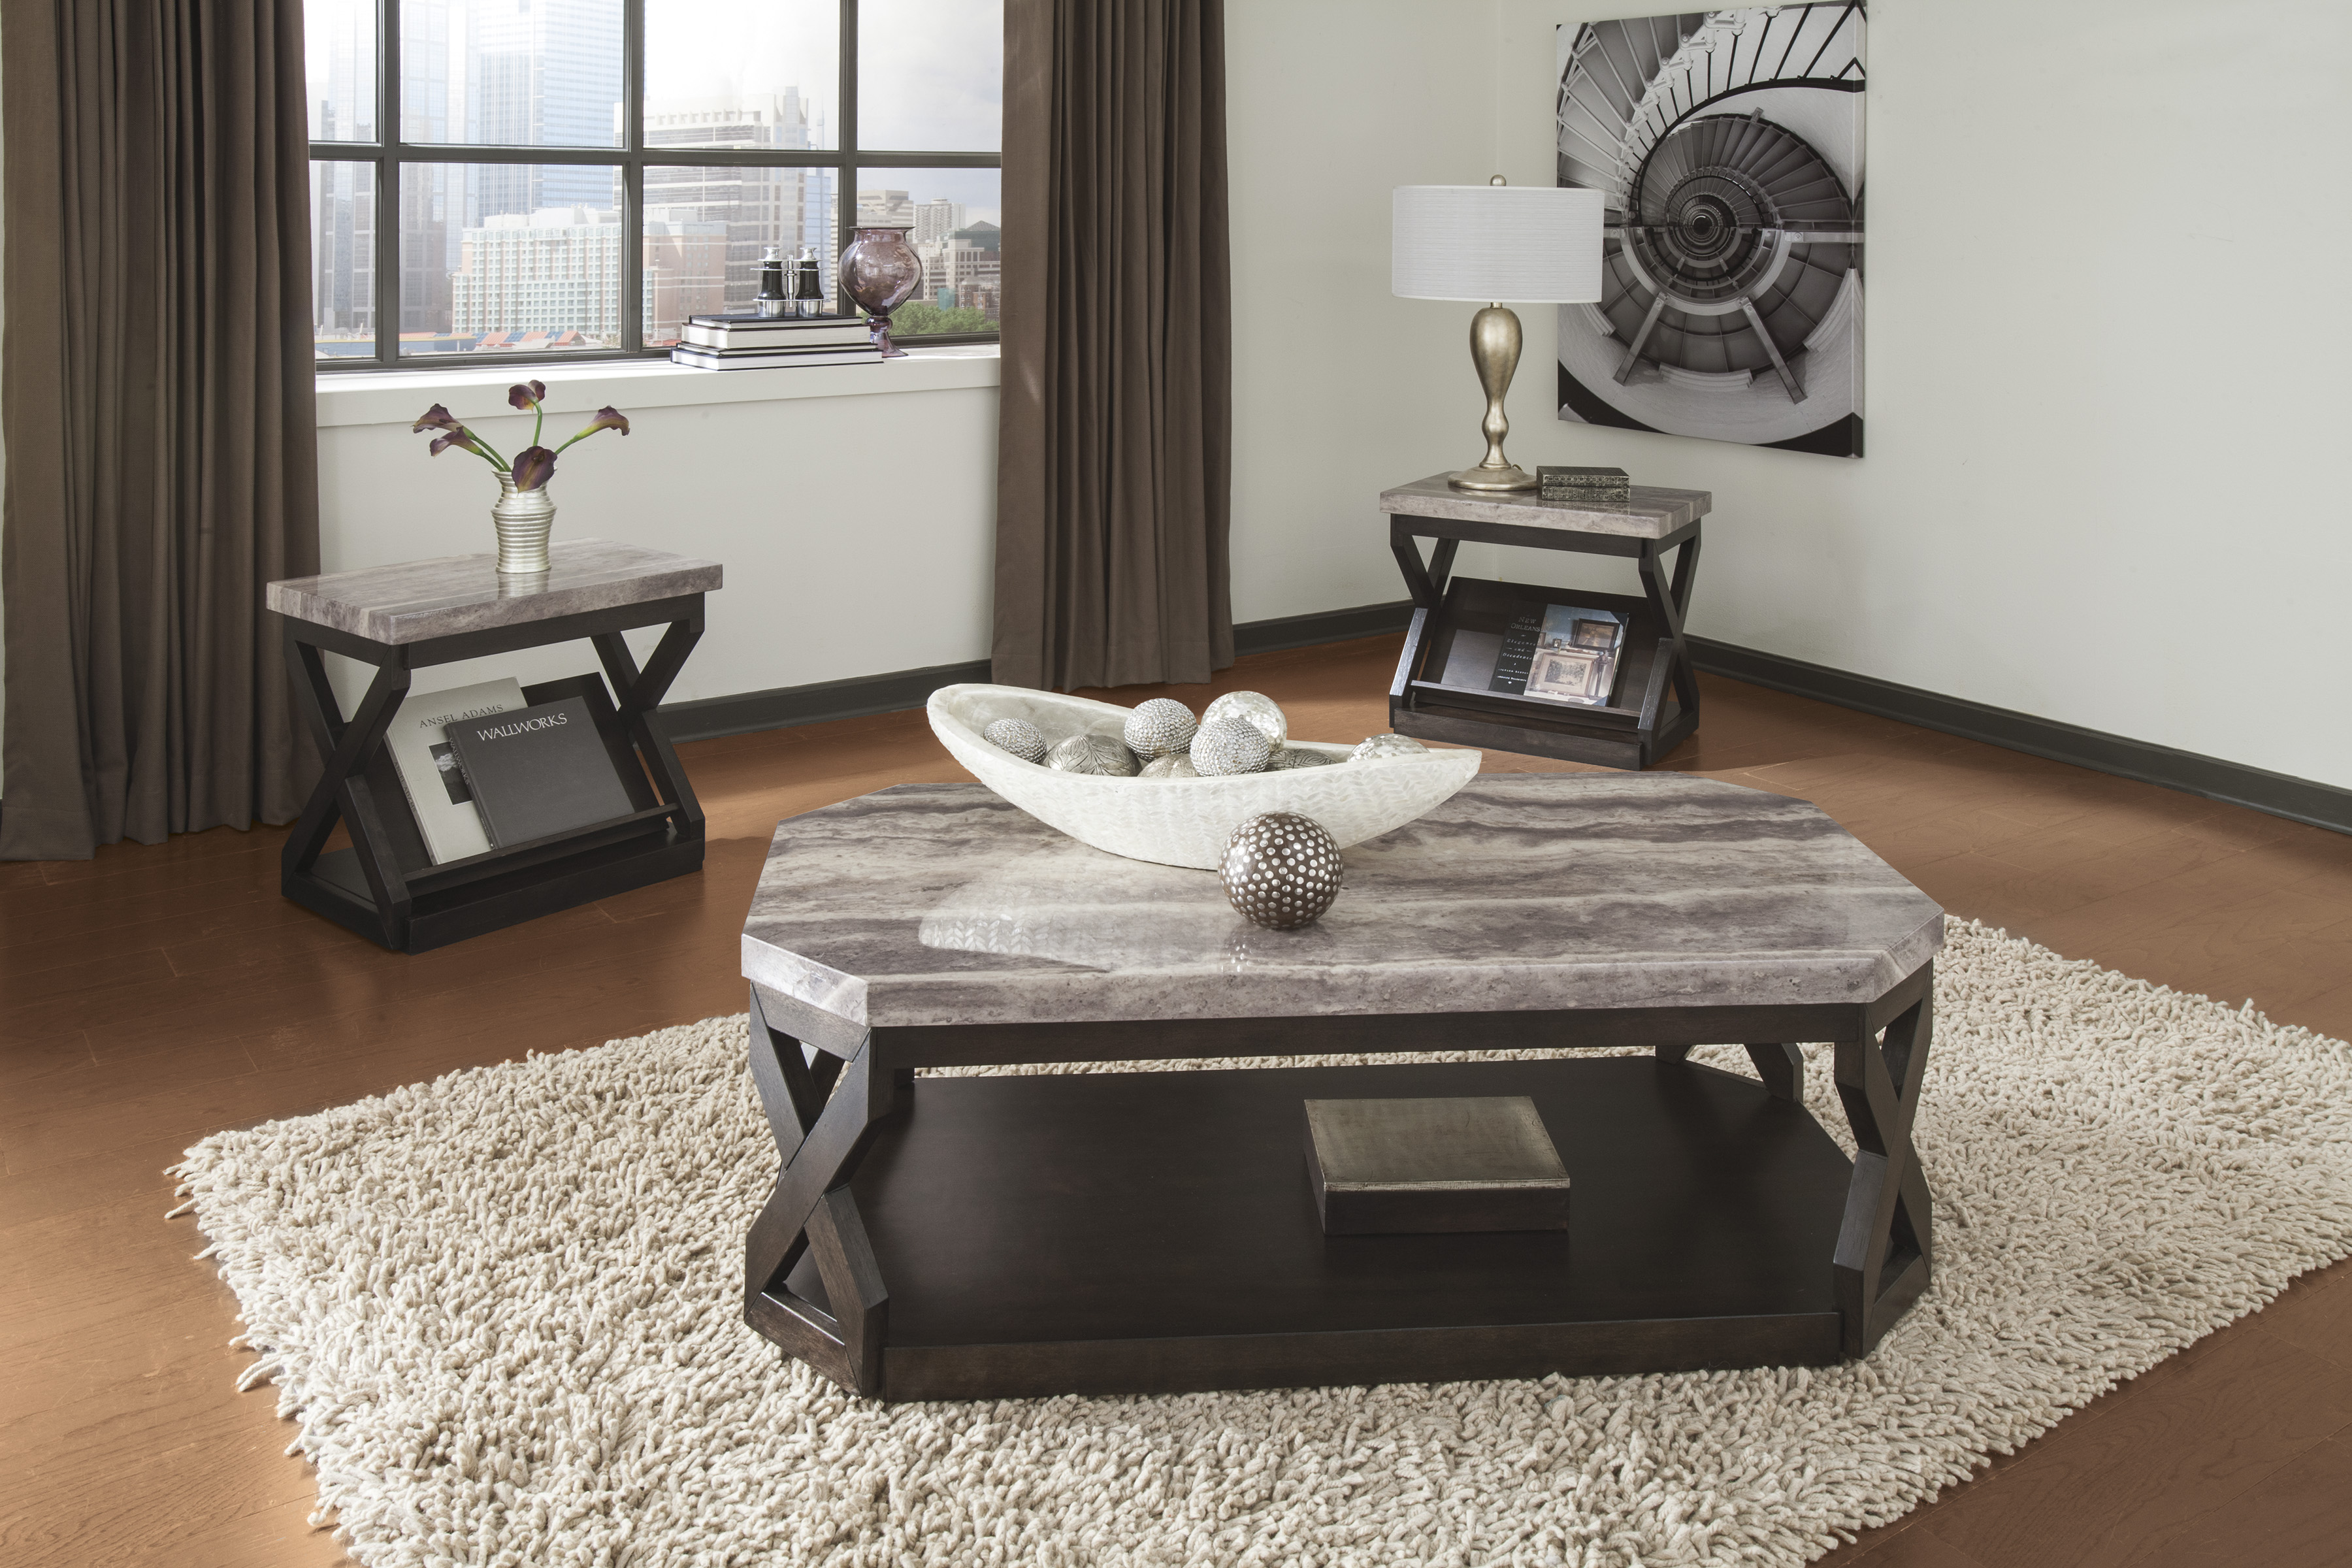 kohls kids shoes probably outrageous great piece set coffee marble stone top and end tables table ashley furniture bamboo dining home sense bedding entertainment wall units wooden